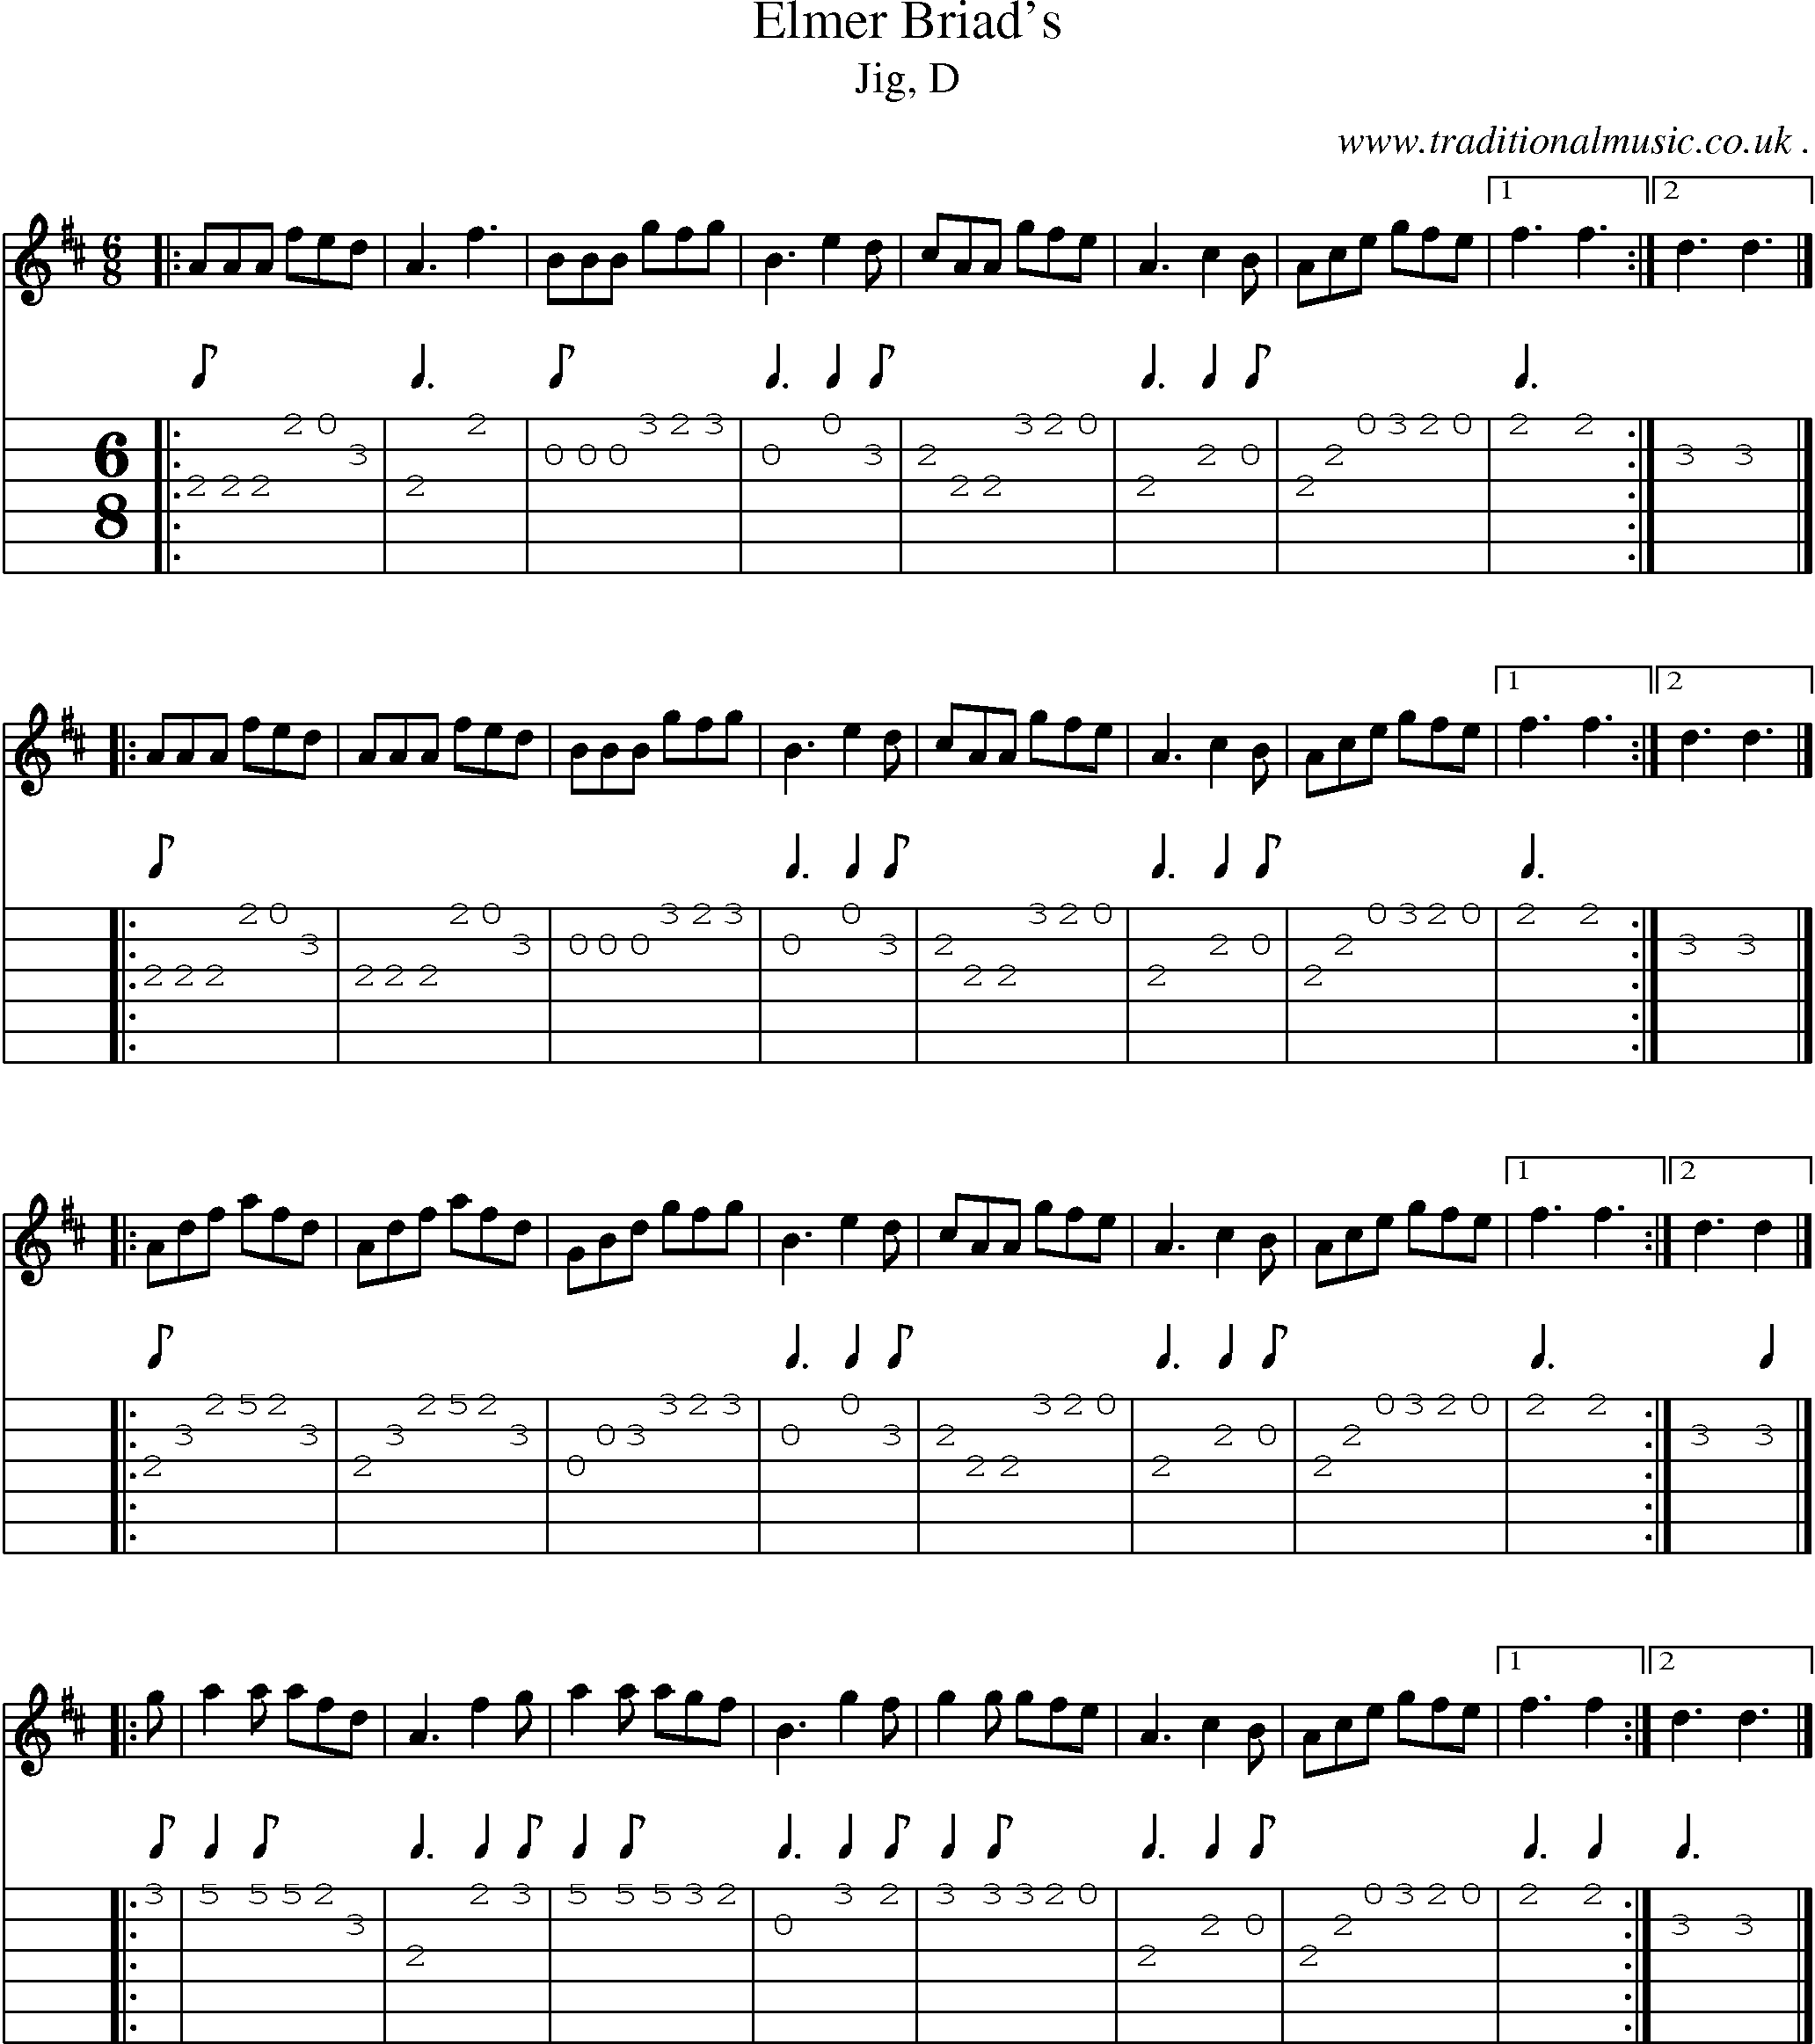 Sheet-music  score, Chords and Guitar Tabs for Elmer Briads